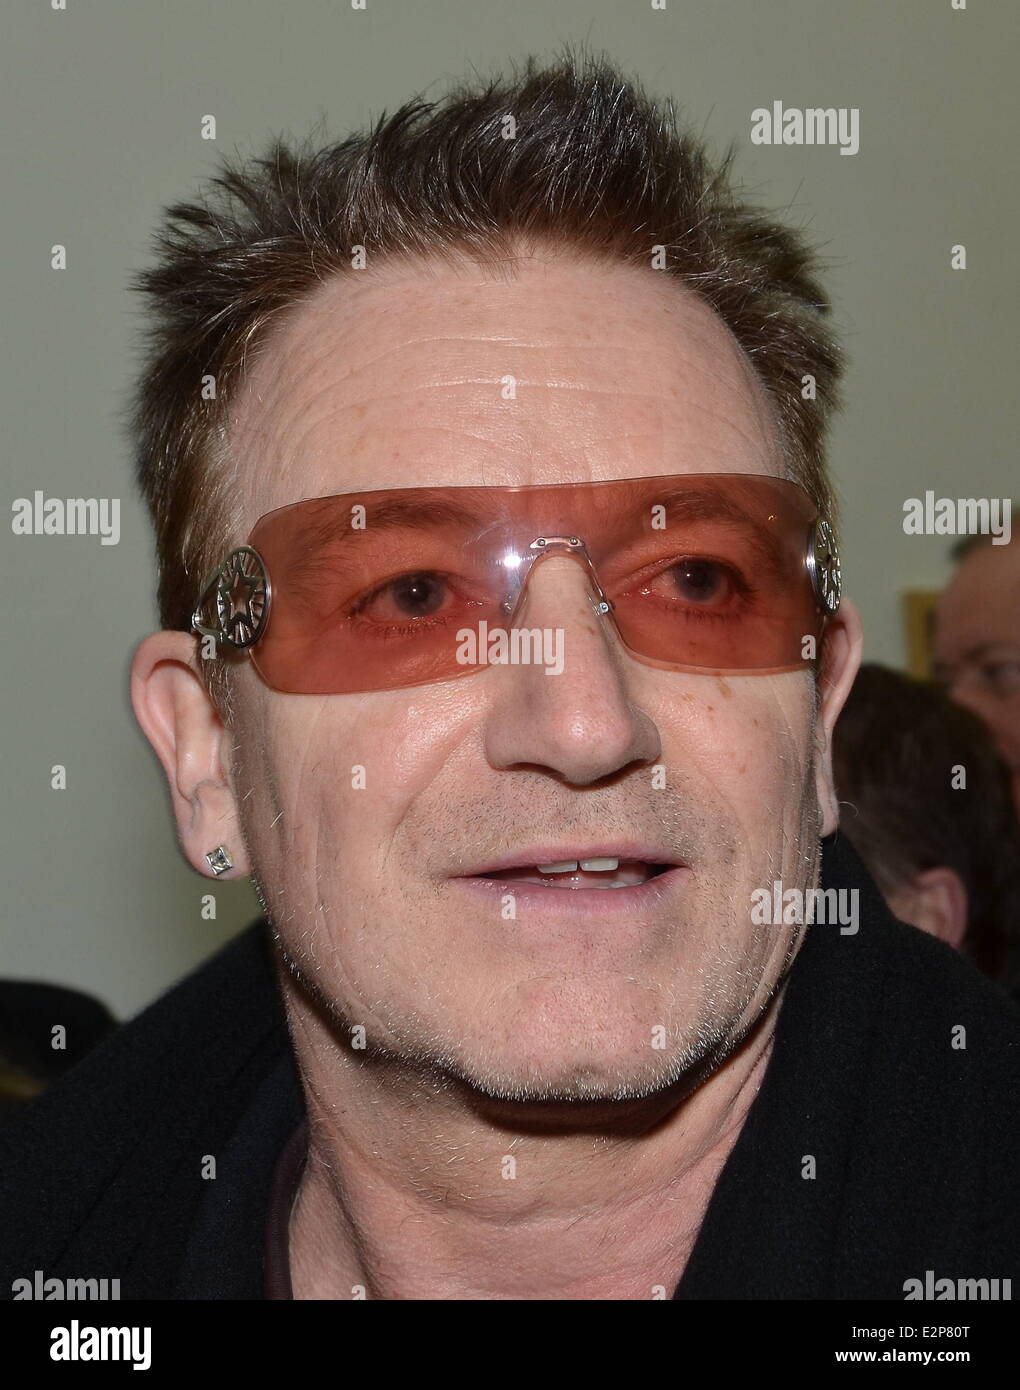 Download preview image - u2-members-bono-and-the-edge-at-the-kerlin-gallery-to-support-their-E2P80T